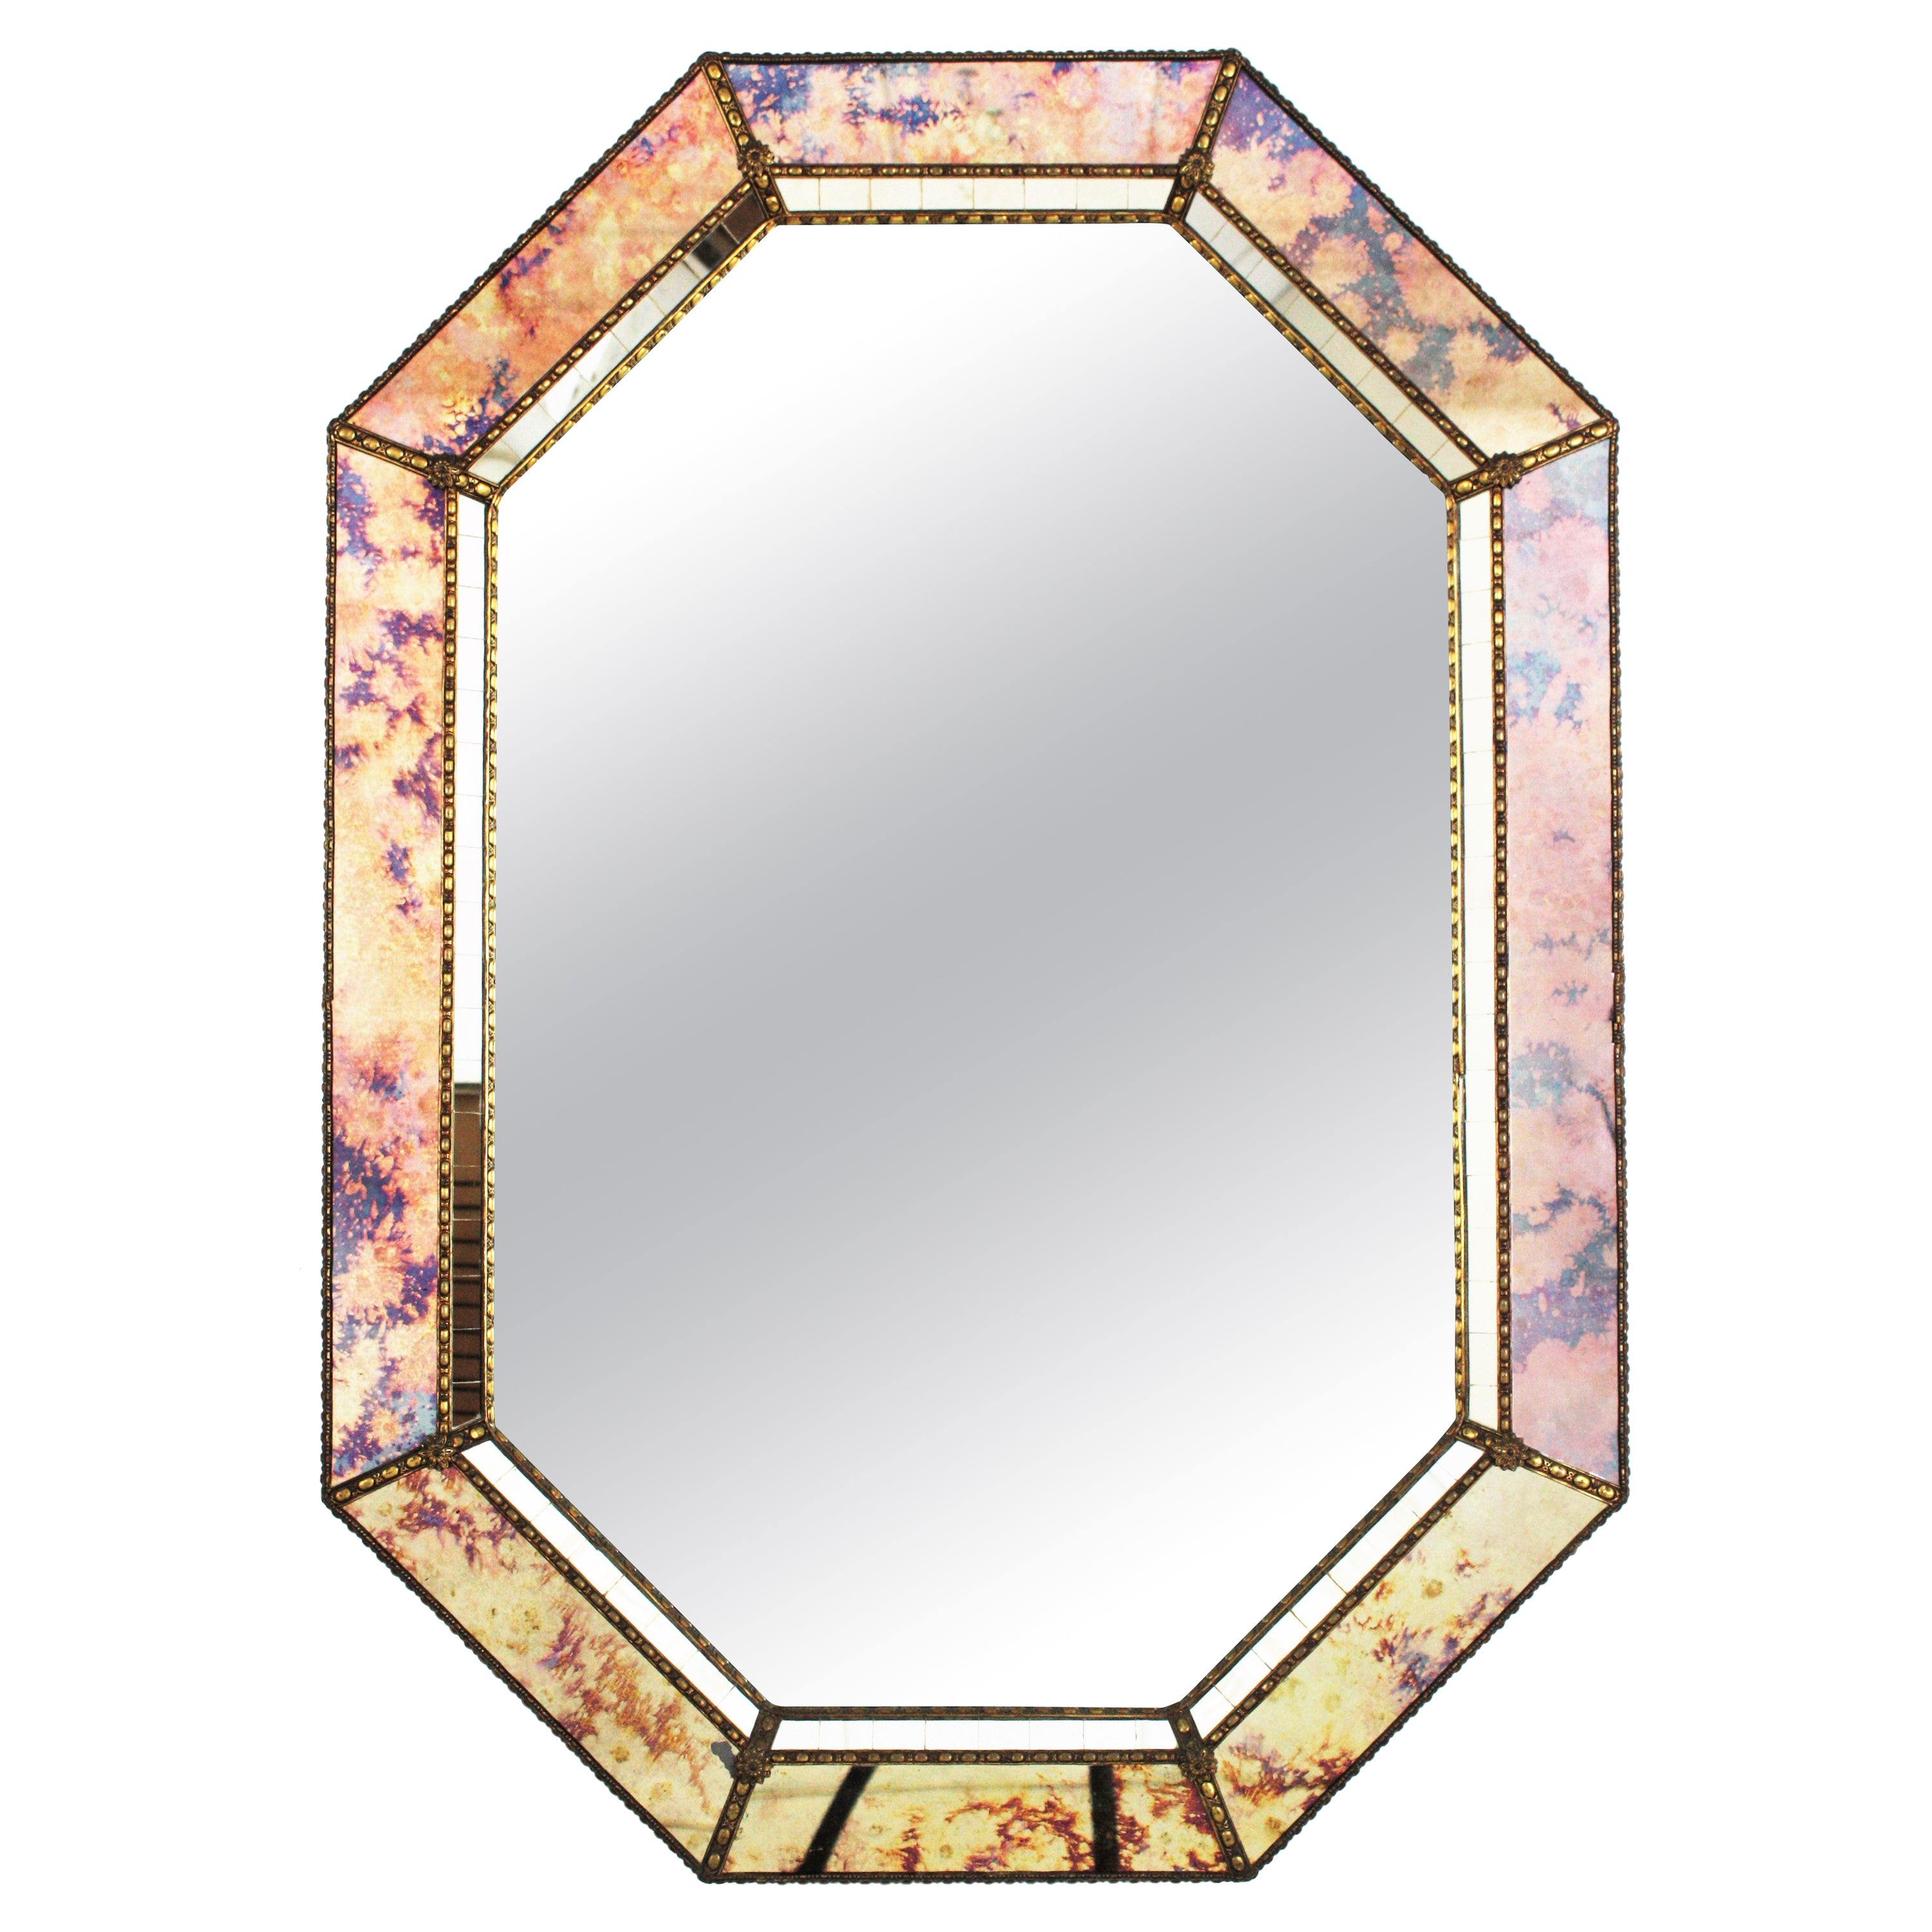 Octagonal Venetian Style Mirror with Iridiscent Glasses and Brass Details